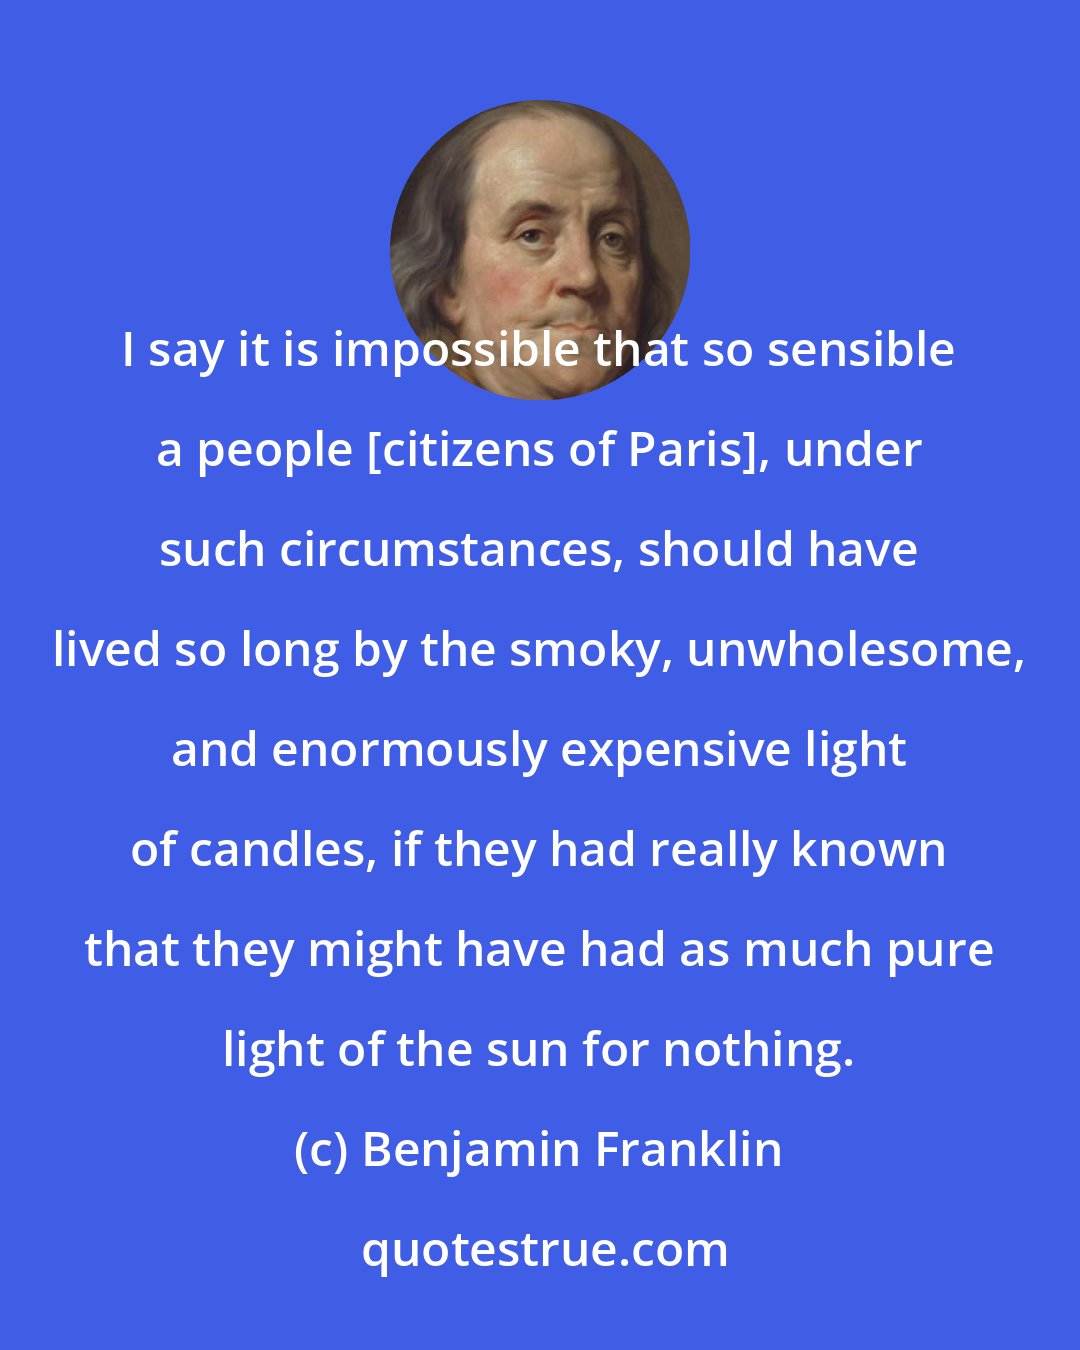 Benjamin Franklin: I say it is impossible that so sensible a people [citizens of Paris], under such circumstances, should have lived so long by the smoky, unwholesome, and enormously expensive light of candles, if they had really known that they might have had as much pure light of the sun for nothing.